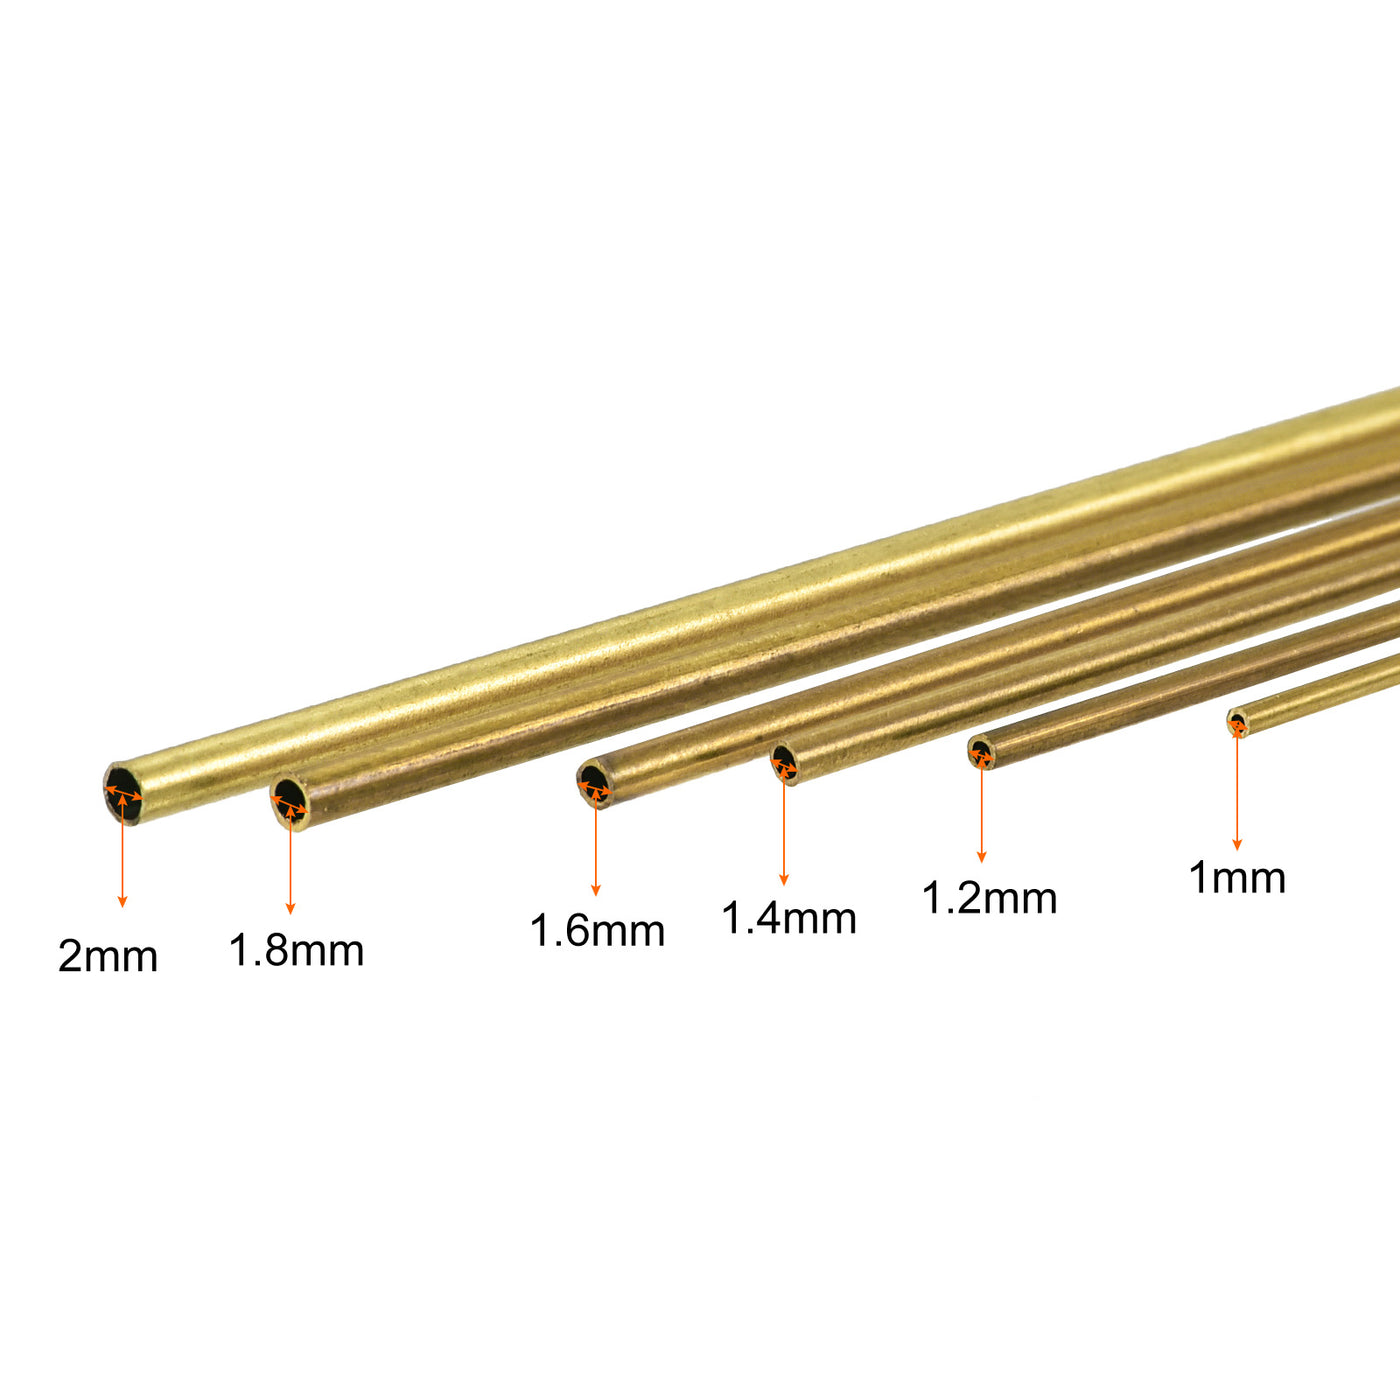 uxcell Uxcell Brass Tube, 1mm 1.2mm 1.4mm 1.6mm 1.8mm 2mm OD x 0.2mm Wall Thickness 300mm Length Metal Tubing, Pack of 6